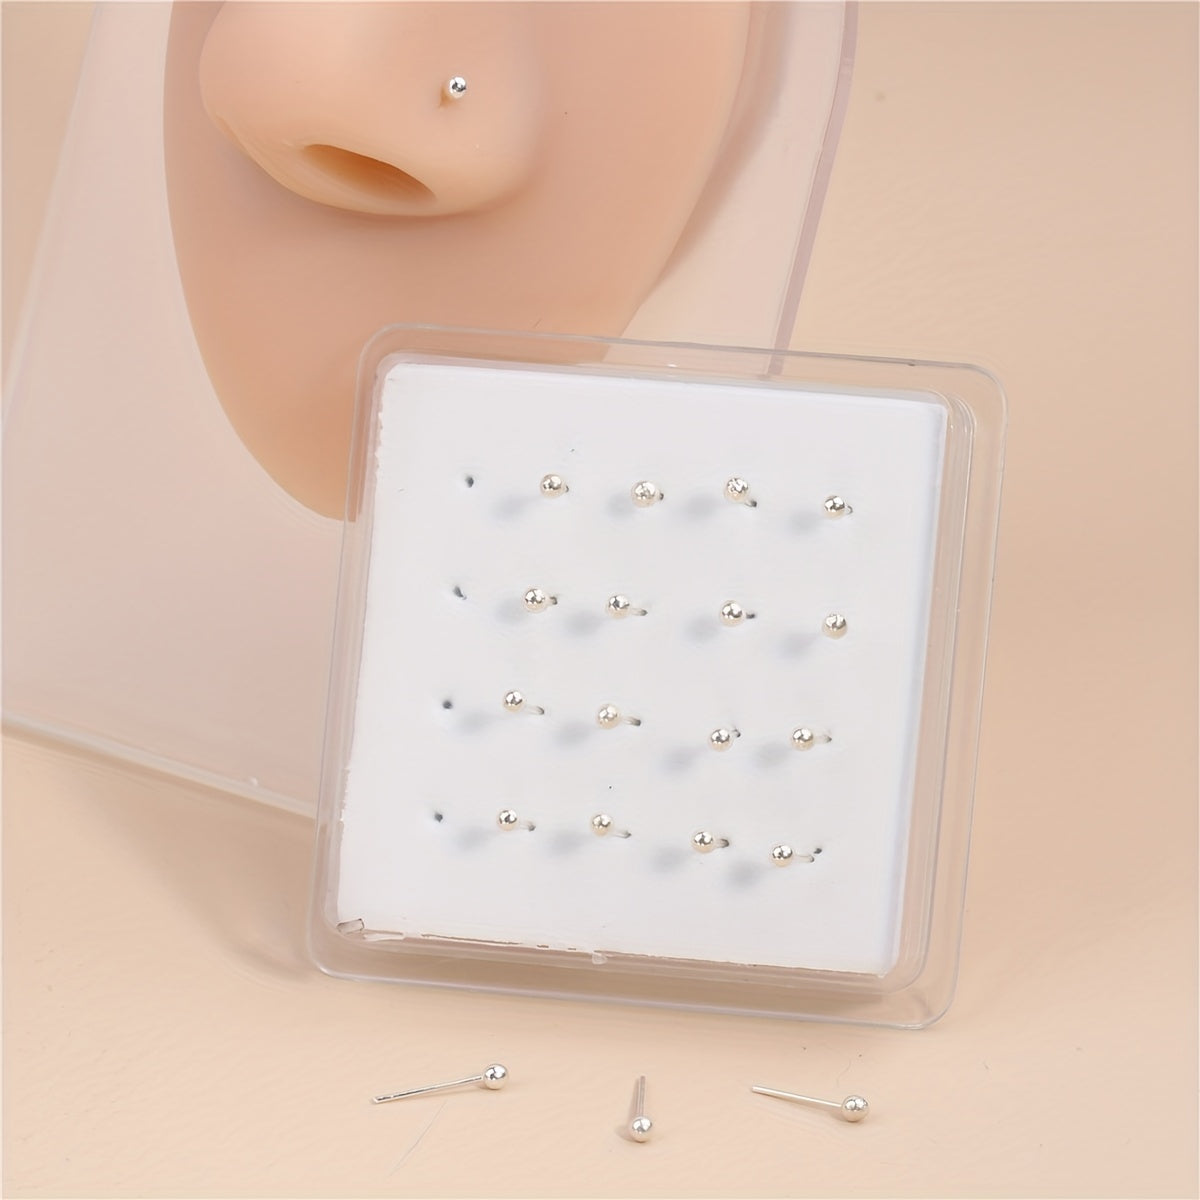 20pcs Simple Style Nose Nail Ring Ear Bone Nail Ring Straight Needle Body Piercing Jewelry